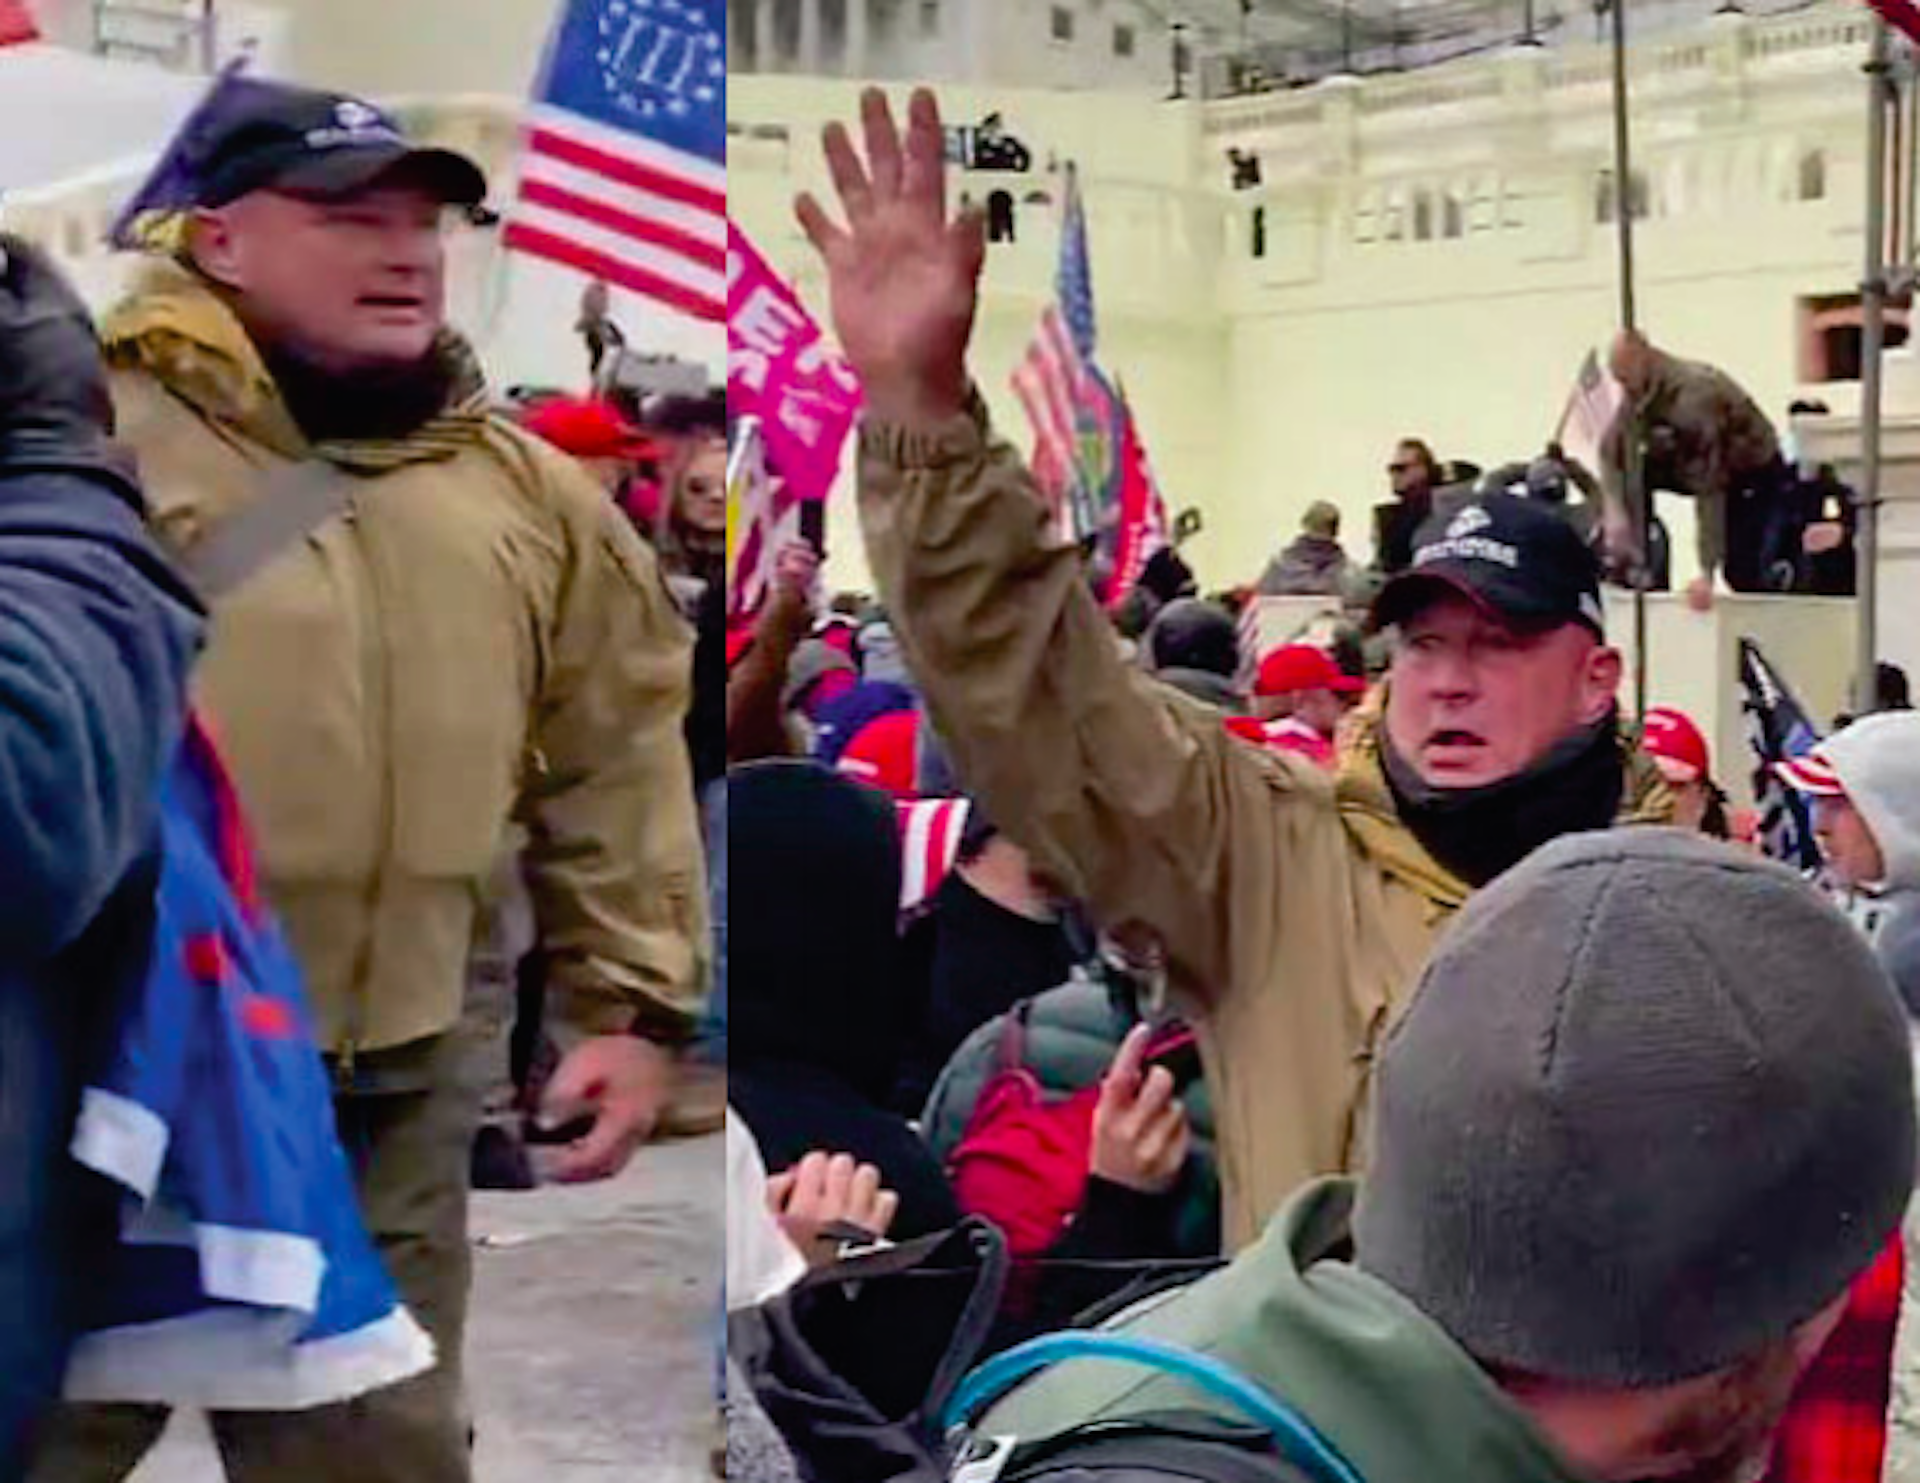 Mechancisburg man Barton Wade Shively as seen in screenshots of videos from the riot on the U.S. Capitol on Jan. 6, 2021.